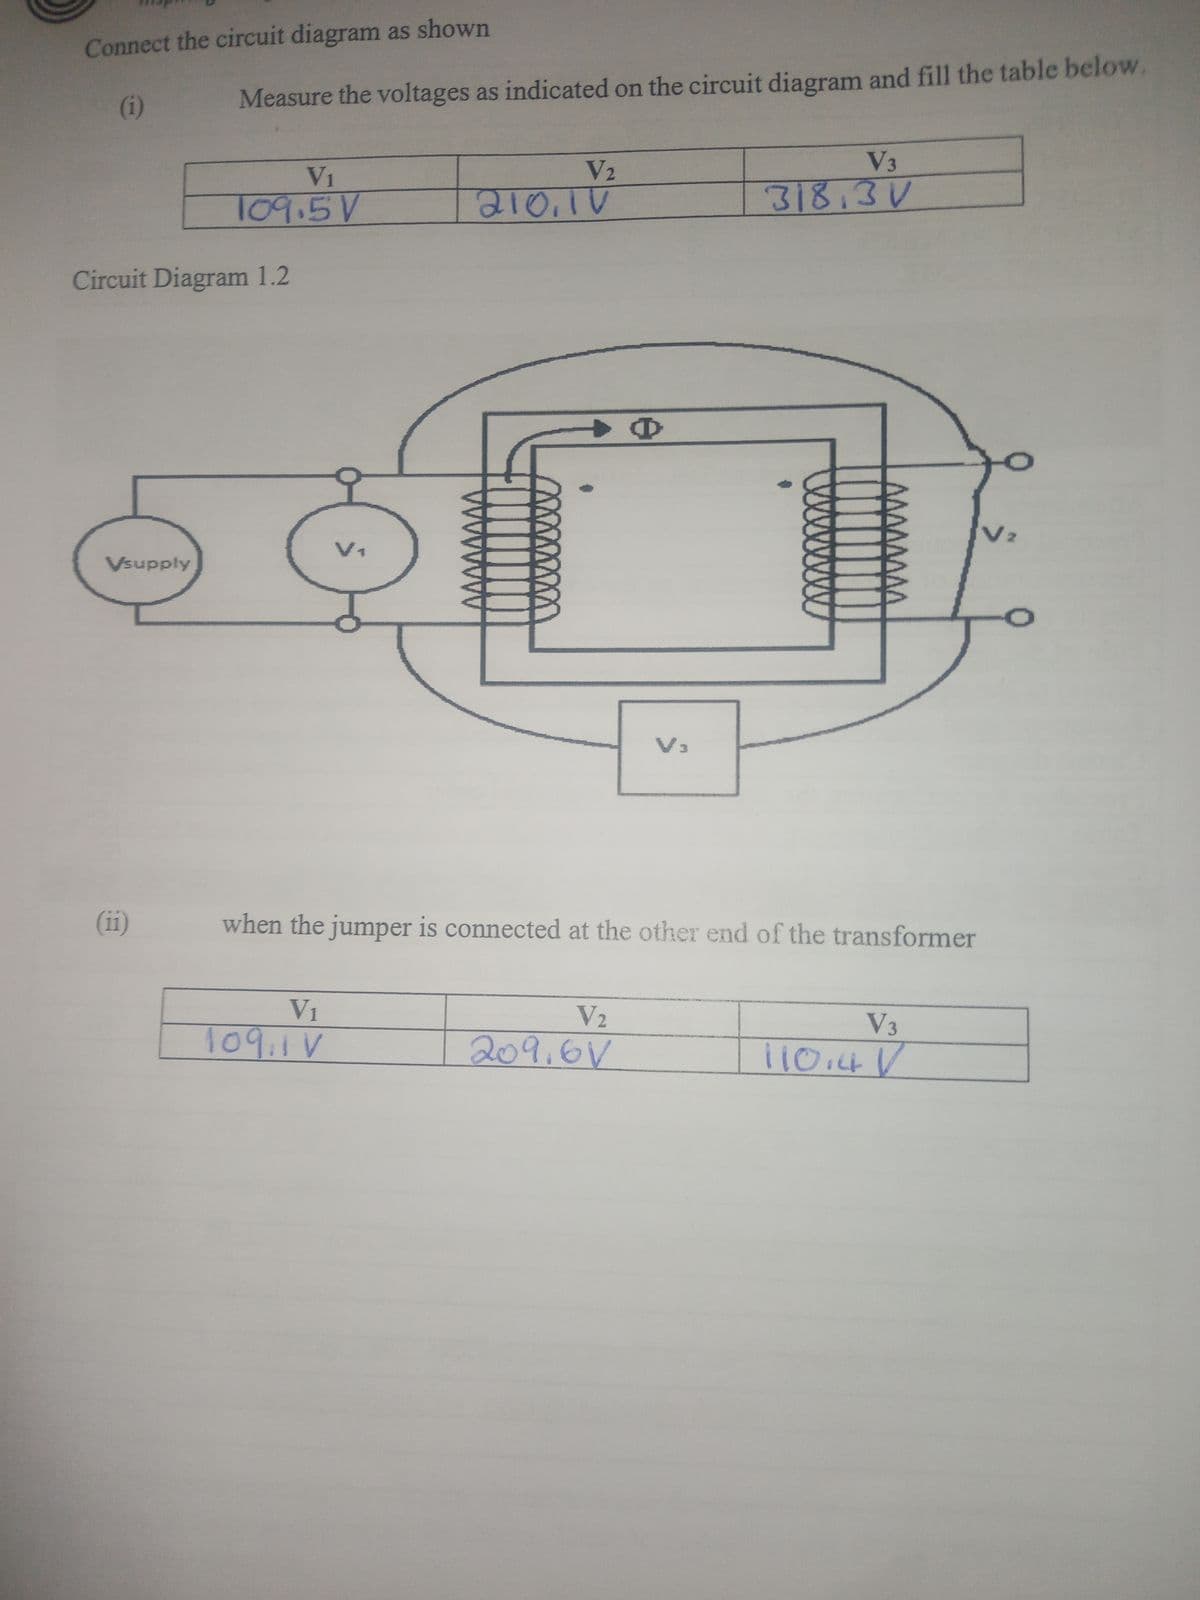 Connect the circuit diagram as shown
(i)
Vsupply
Measure the voltages as indicated on the circuit diagram and fill the table below.
Circuit Diagram 1.2
(11)
V1
109.5V
V1
V₁
109,1V
V2
210,10
V3
when the jumper is connected at the other end of the transformer
V₂
209.6V
V3
318.3V
V3
11014 1²